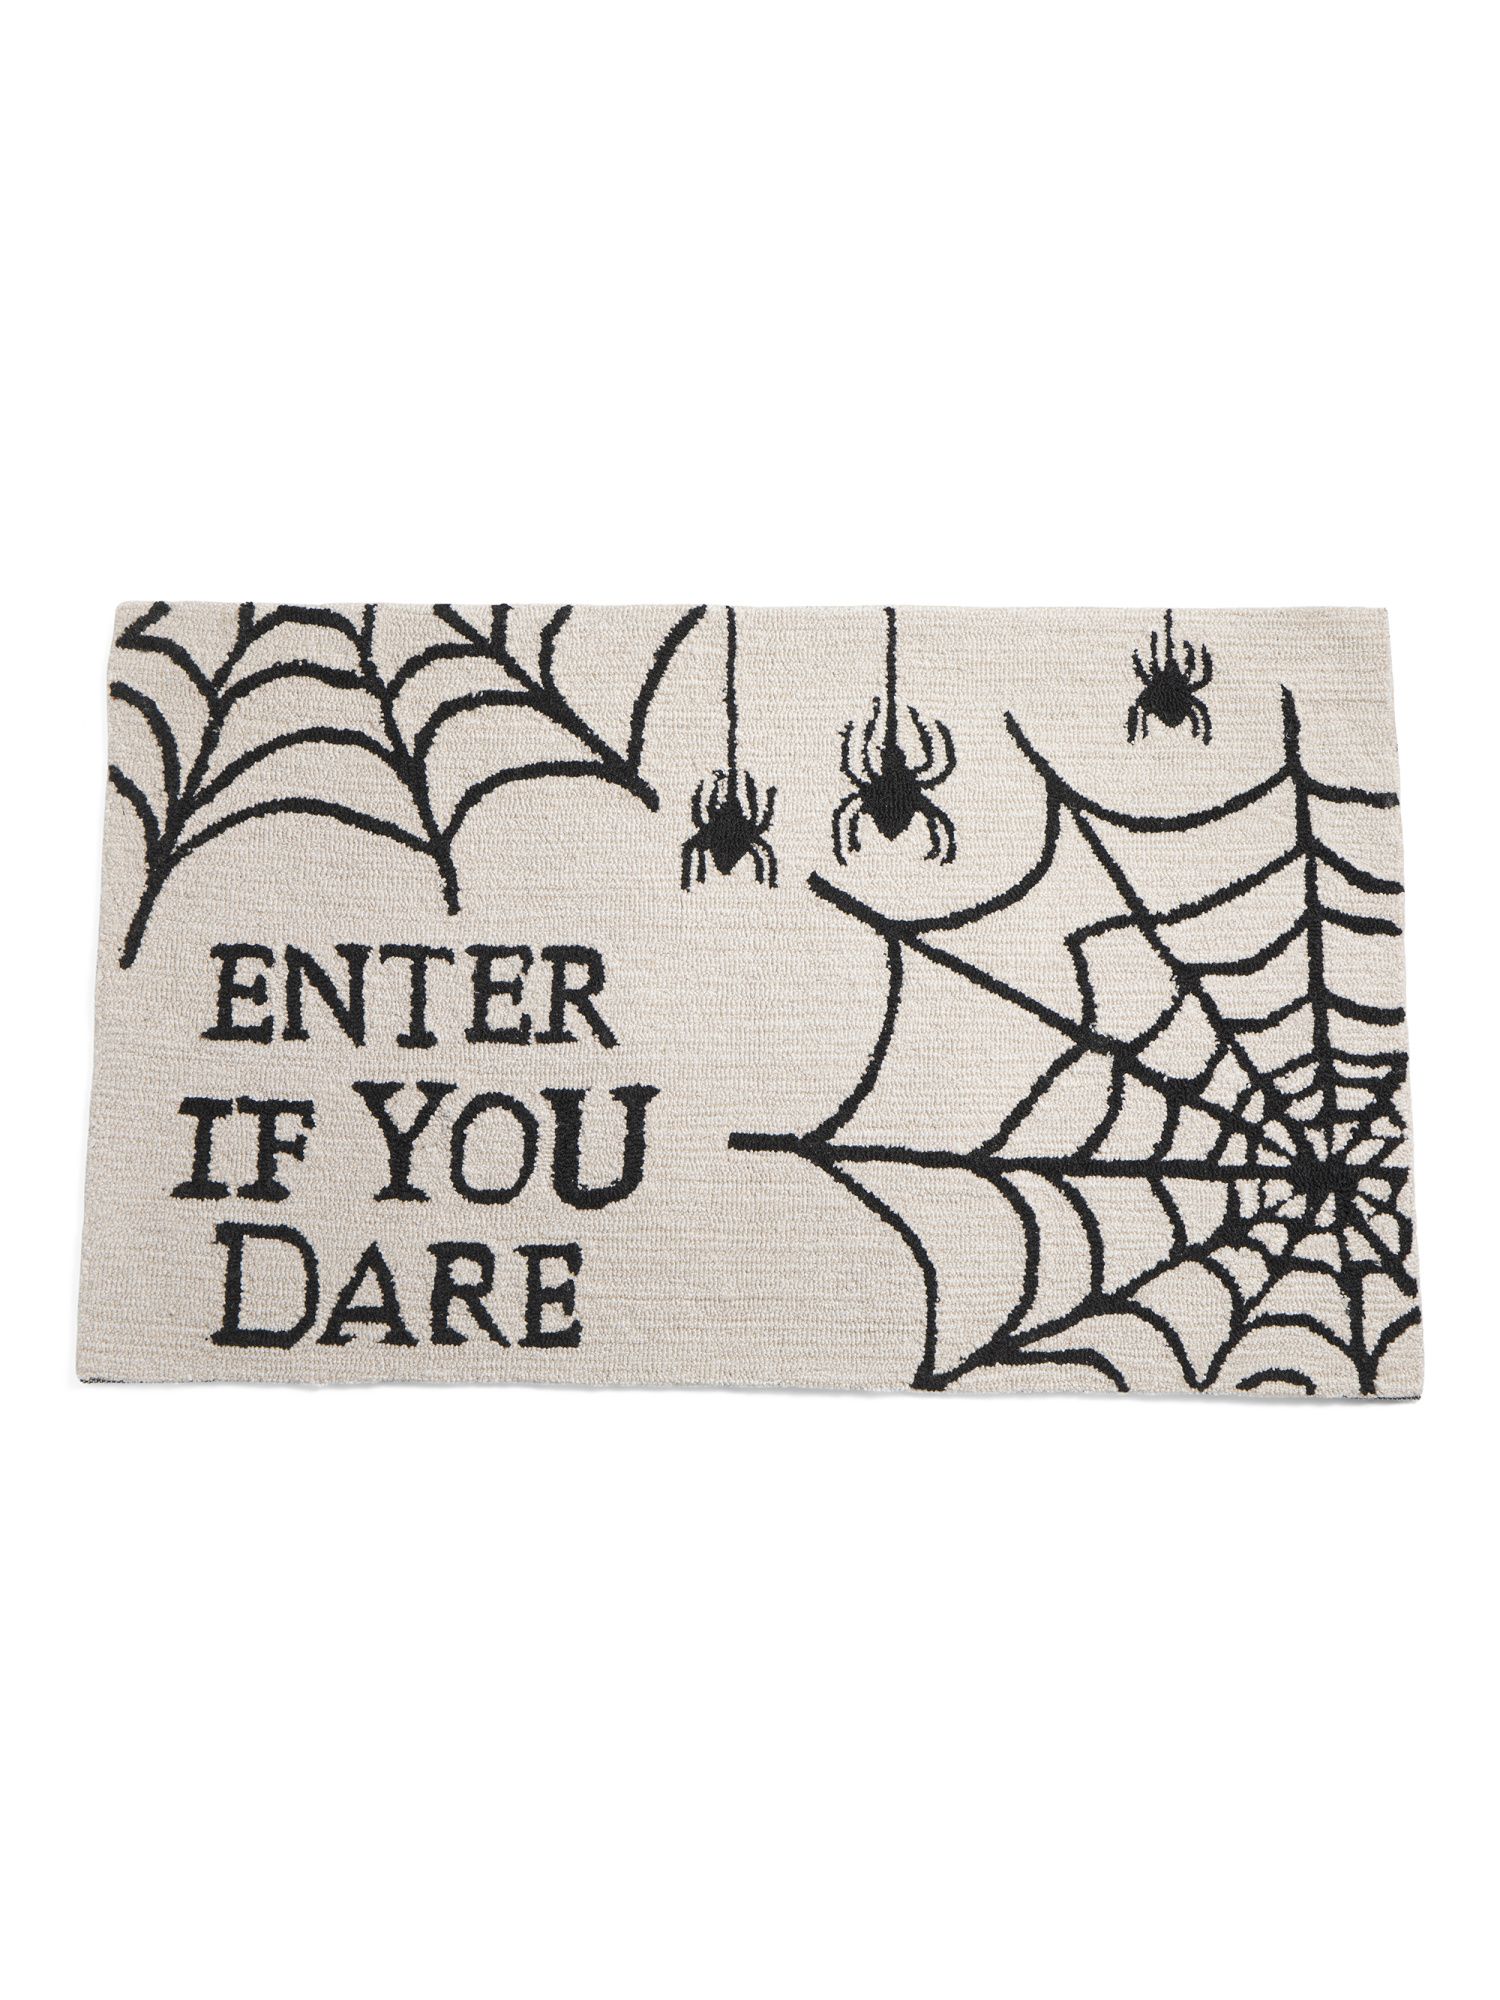 27x45 Hand Hooked Enter If You Dare Rug | TJ Maxx